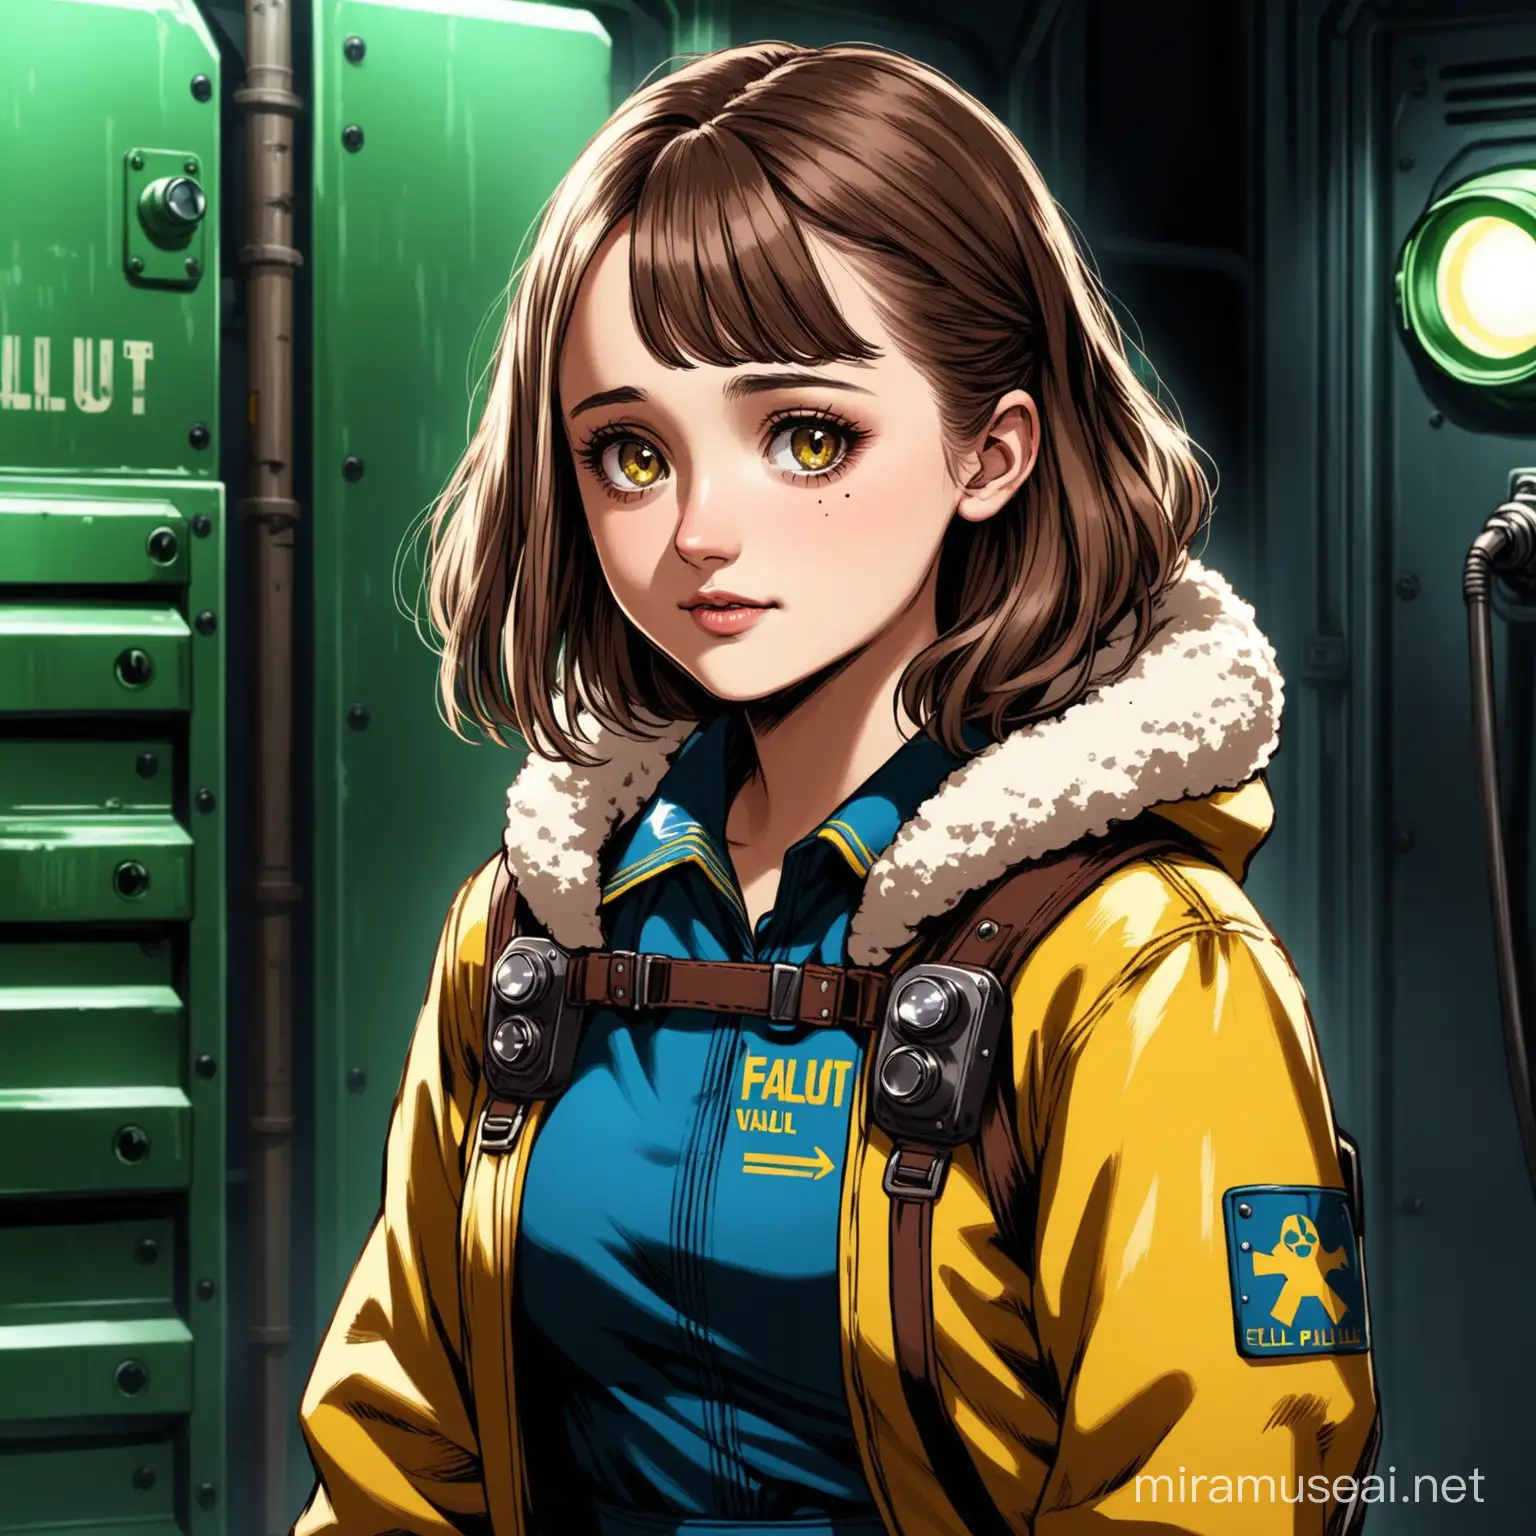 Actress Ella Purnell Portrays Fallout Game Vault Dweller in PostApocalyptic Setting